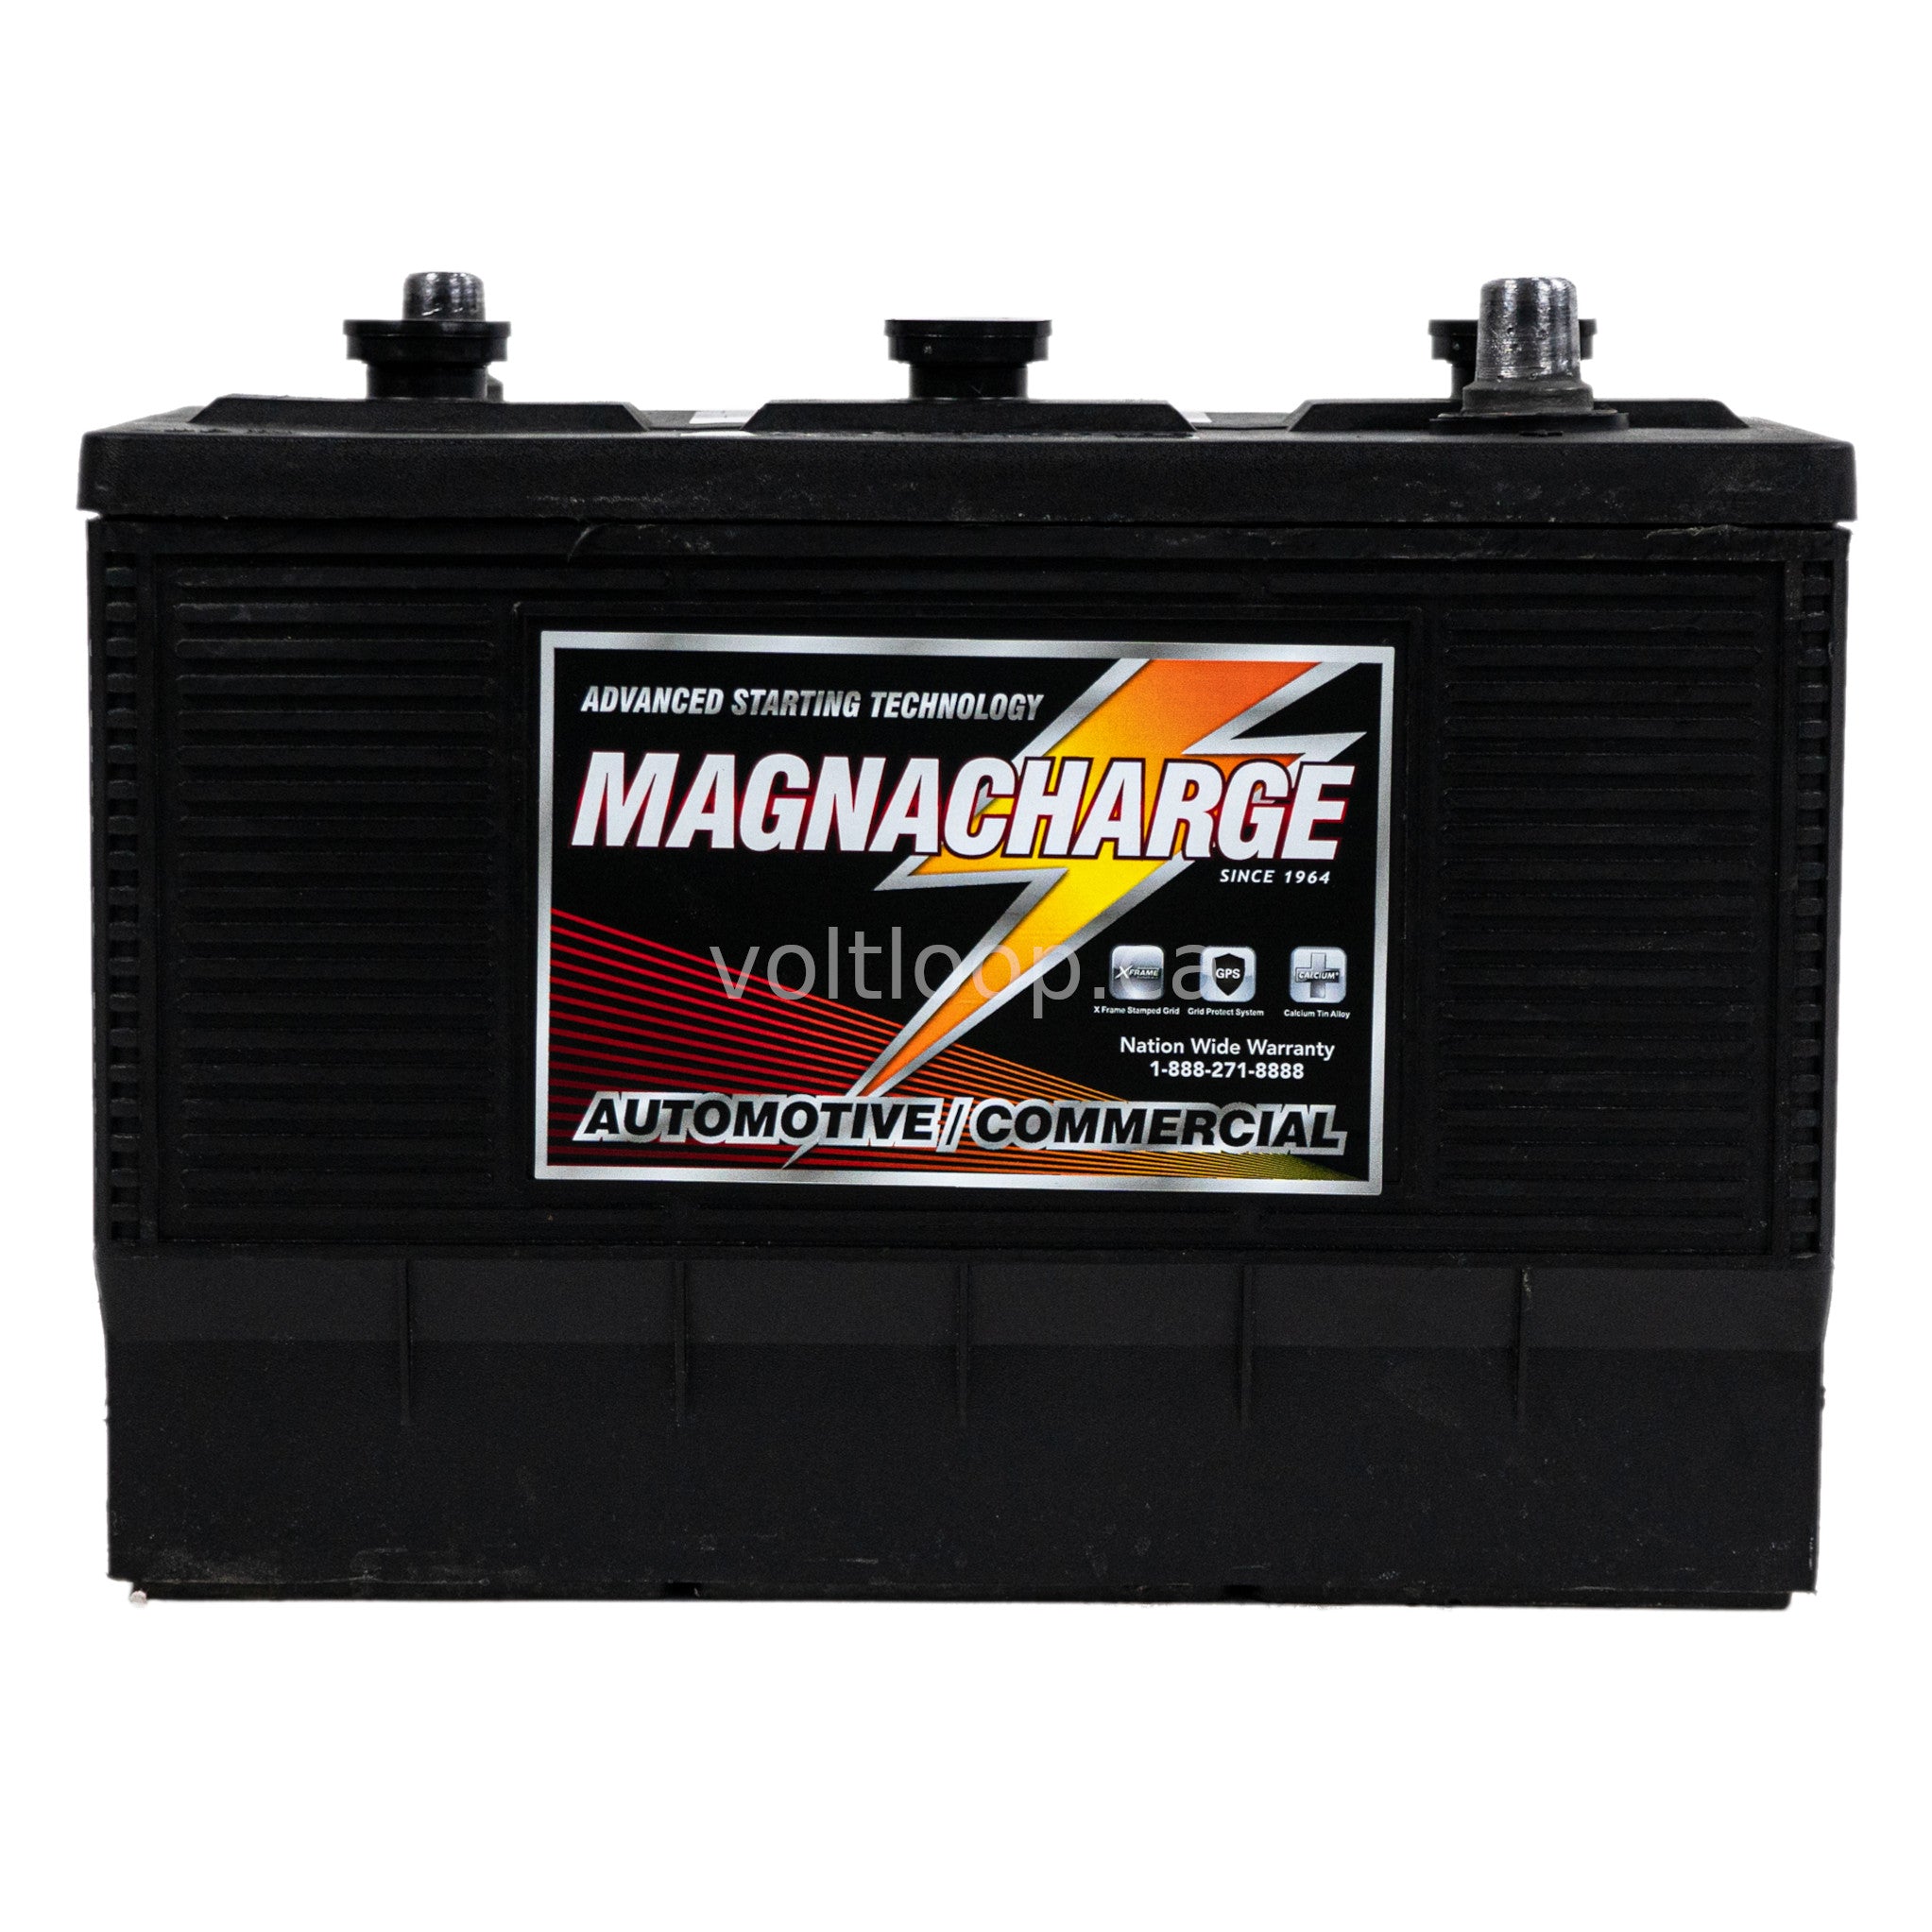 Magnacharge 4-1350 Group 4 Commercial Battery